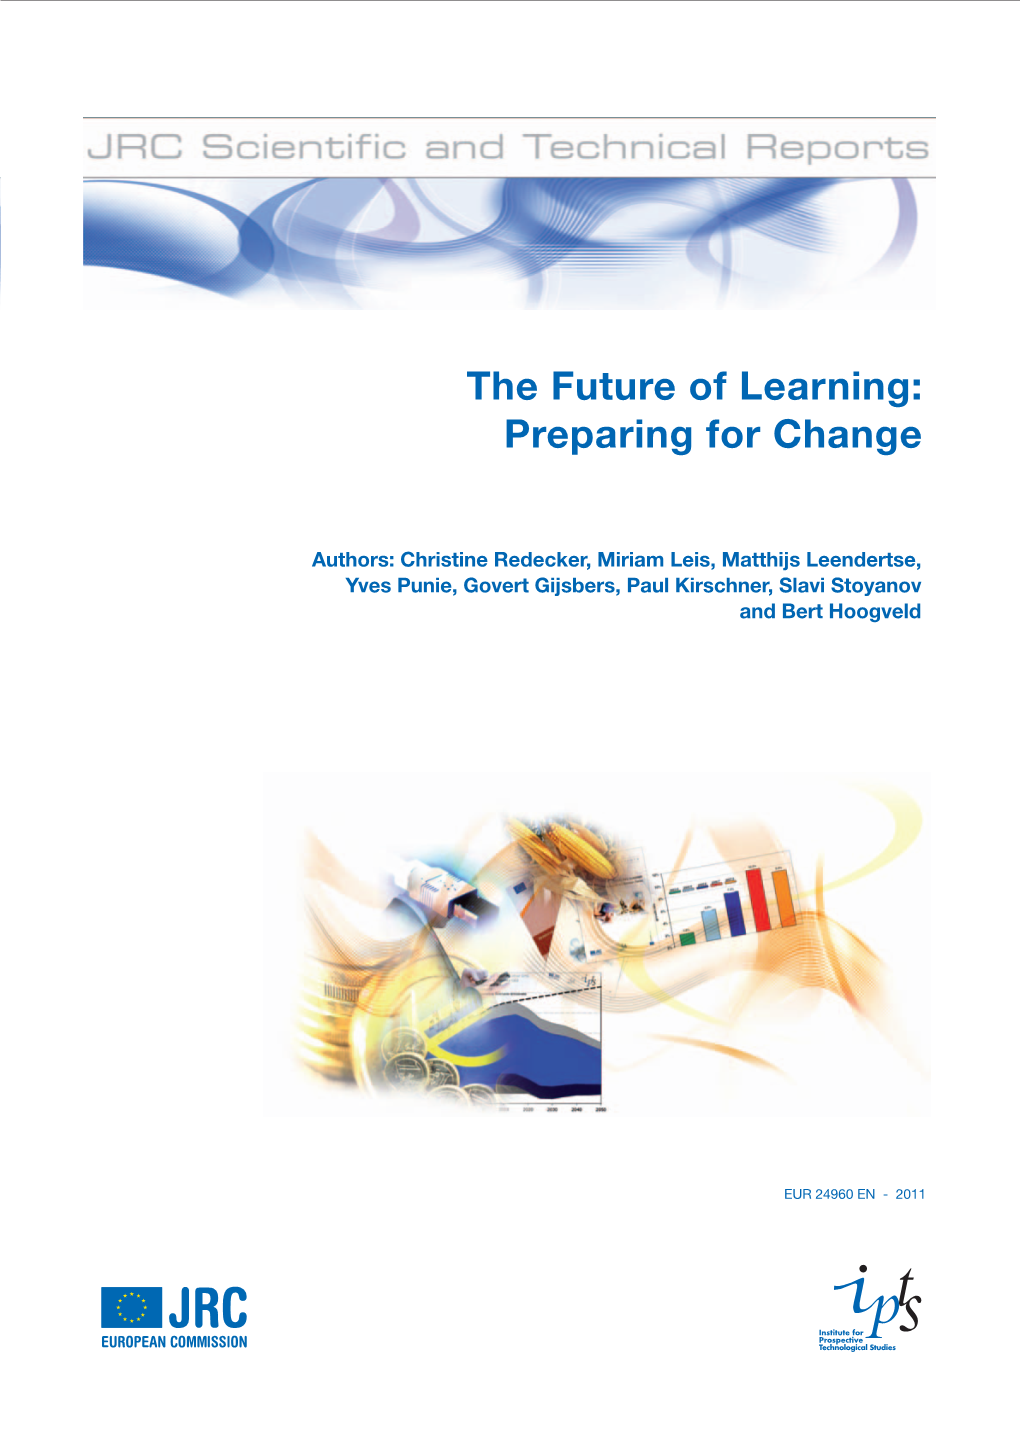 The Future of Learning: Preparing for Change